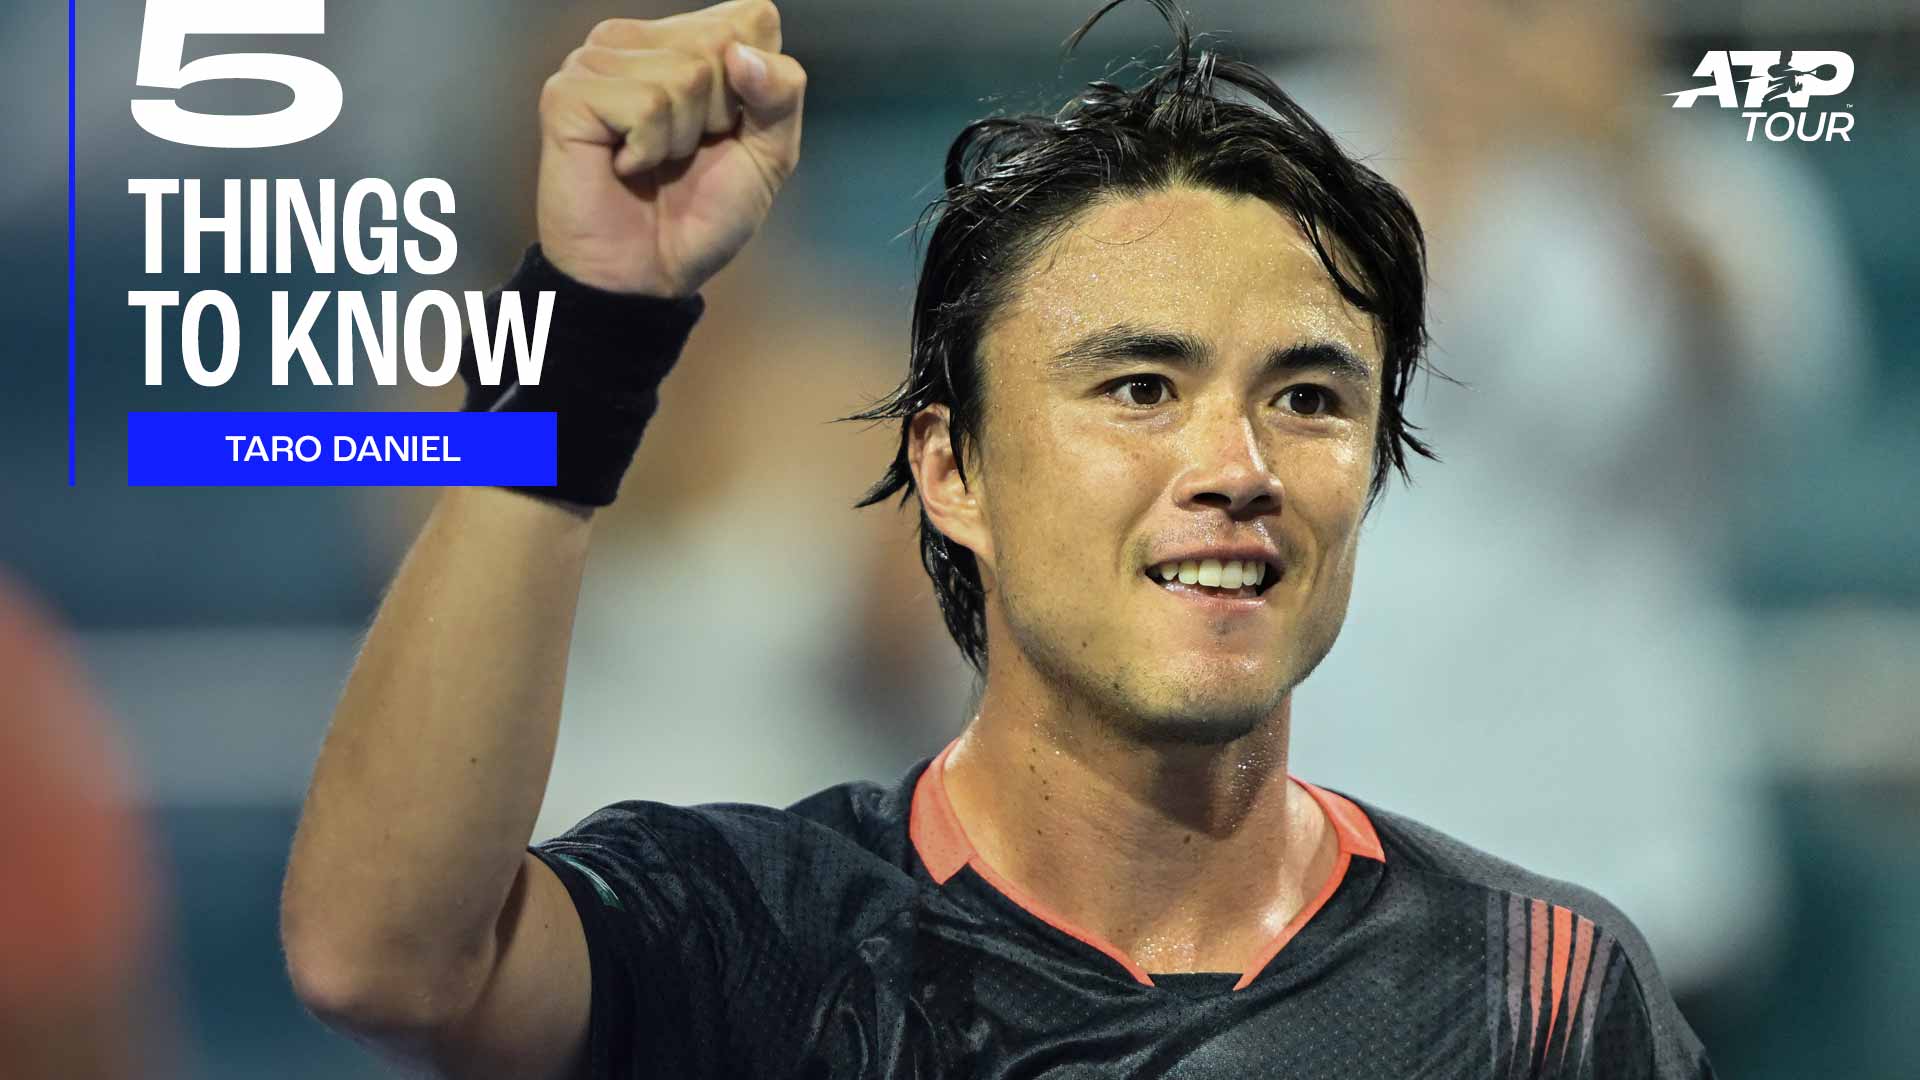 Five Things To Know About Taro Daniel